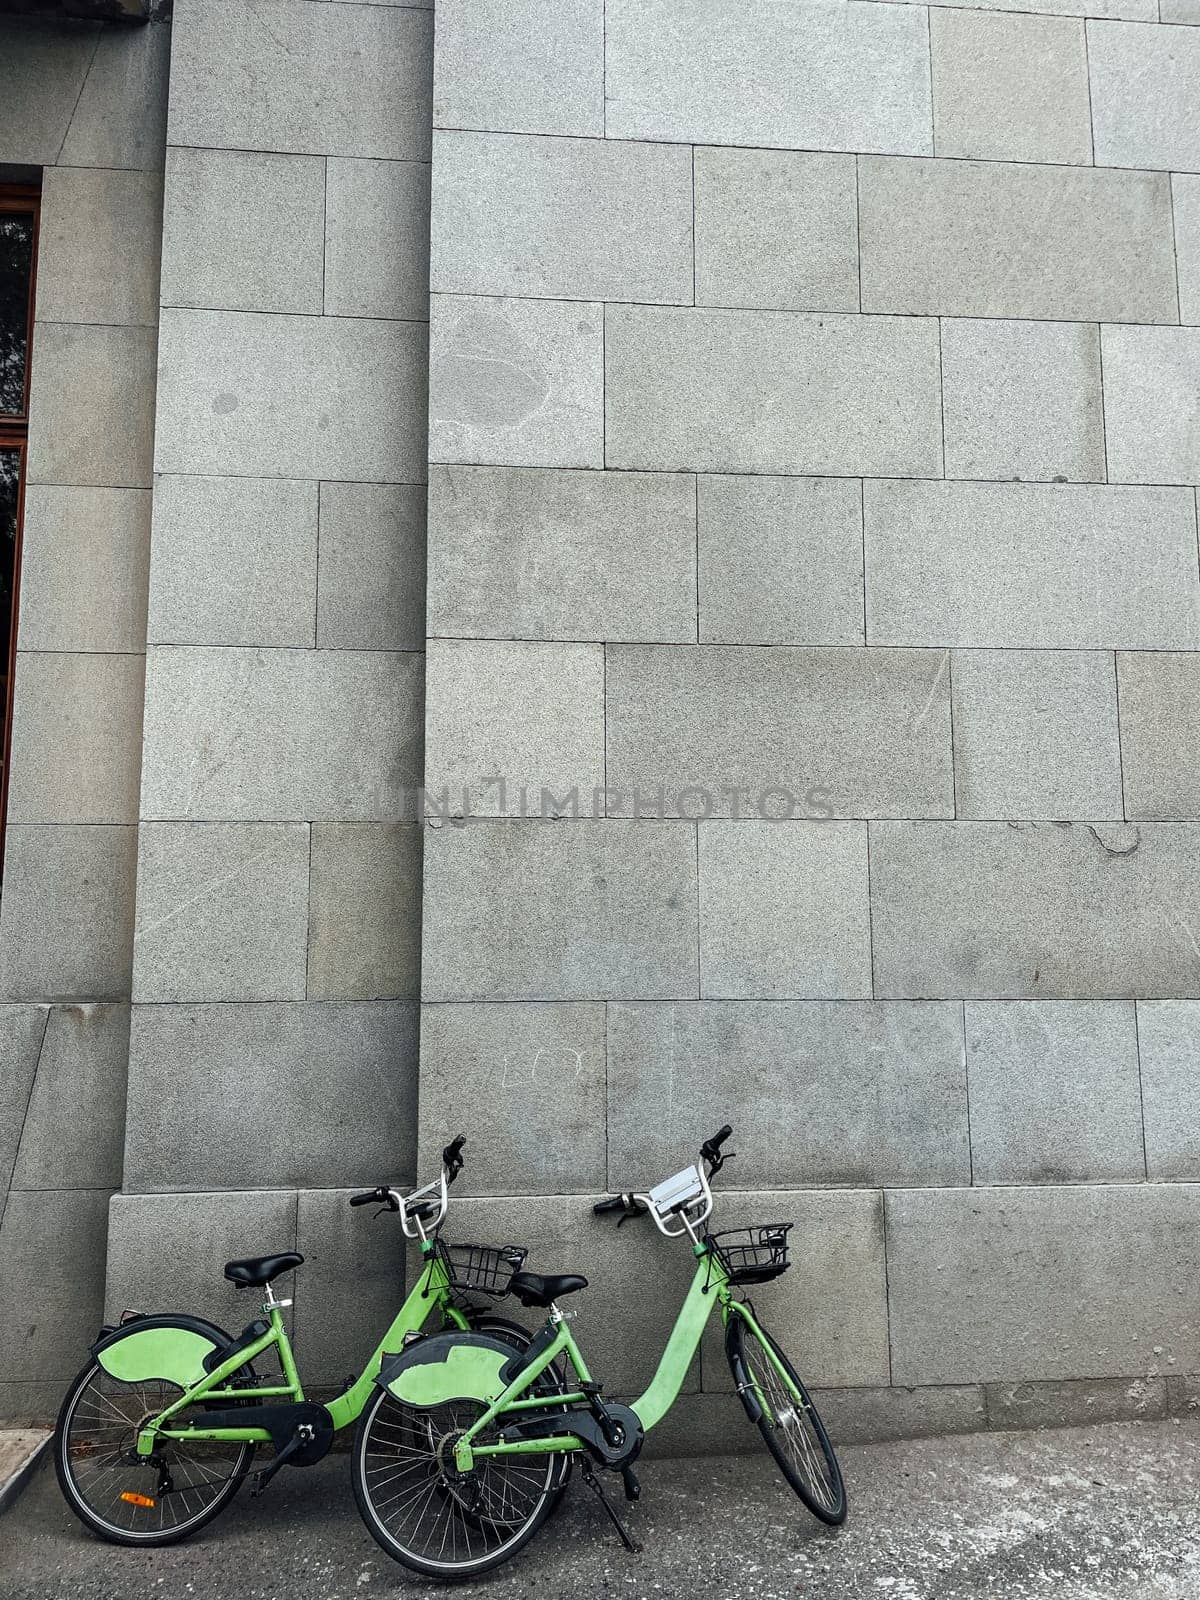 Two green bicycles for a ride around stand by the wall without people